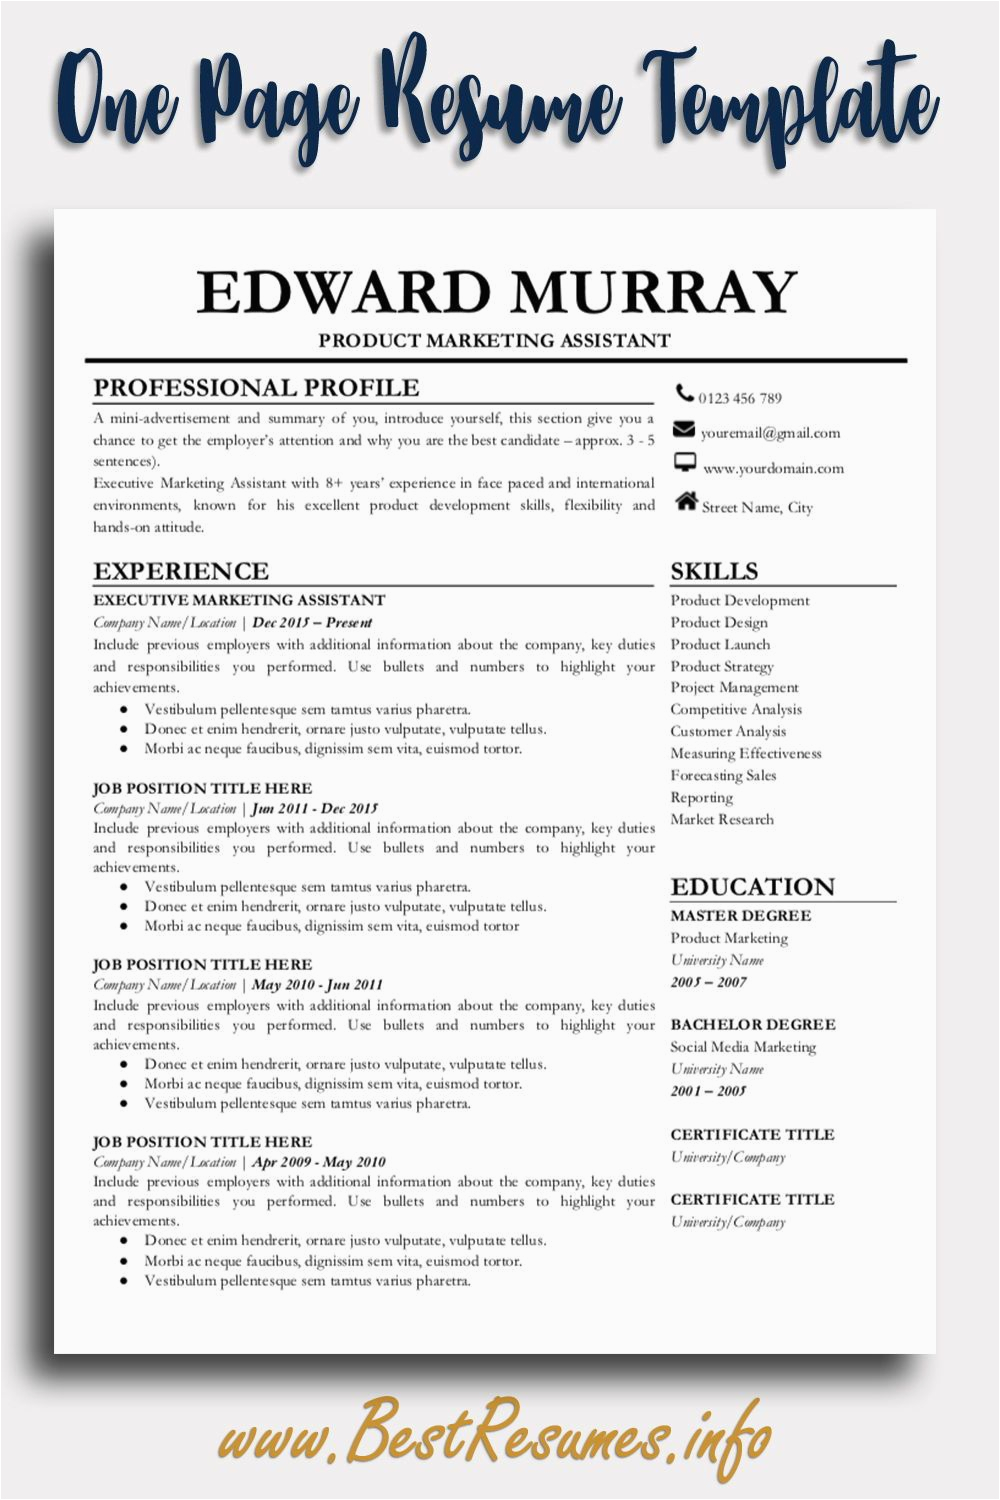 Free Resume Templates for Teaching Positions Best Teacher Resume Templates Professional Resume